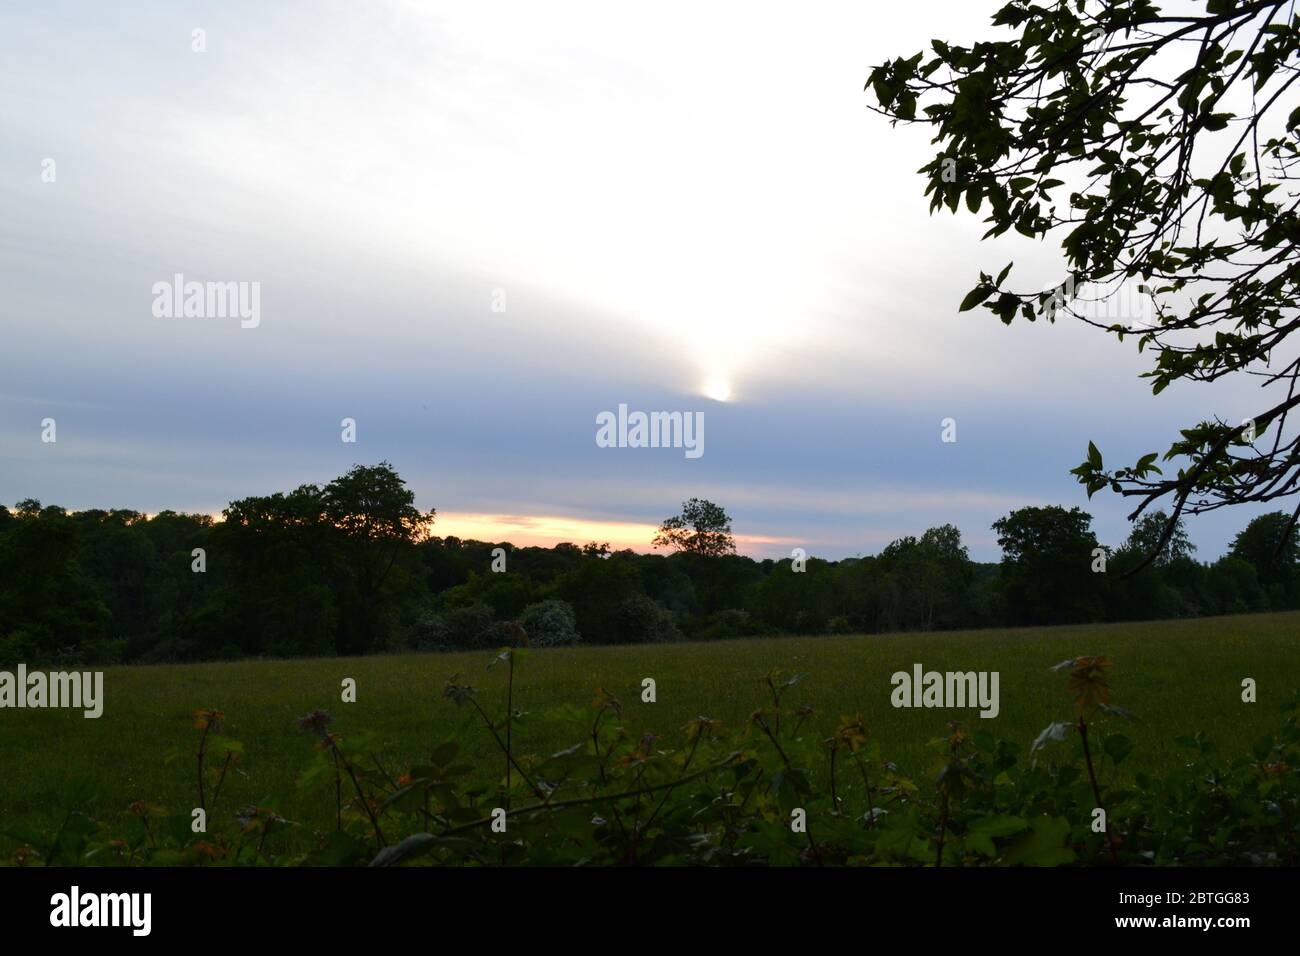 Late May in north west Kent, England. Fields at Charles Darwin's village, Downe, at dusk. Sunset, thin cloud, peaceful, tranquil country scene Stock Photo